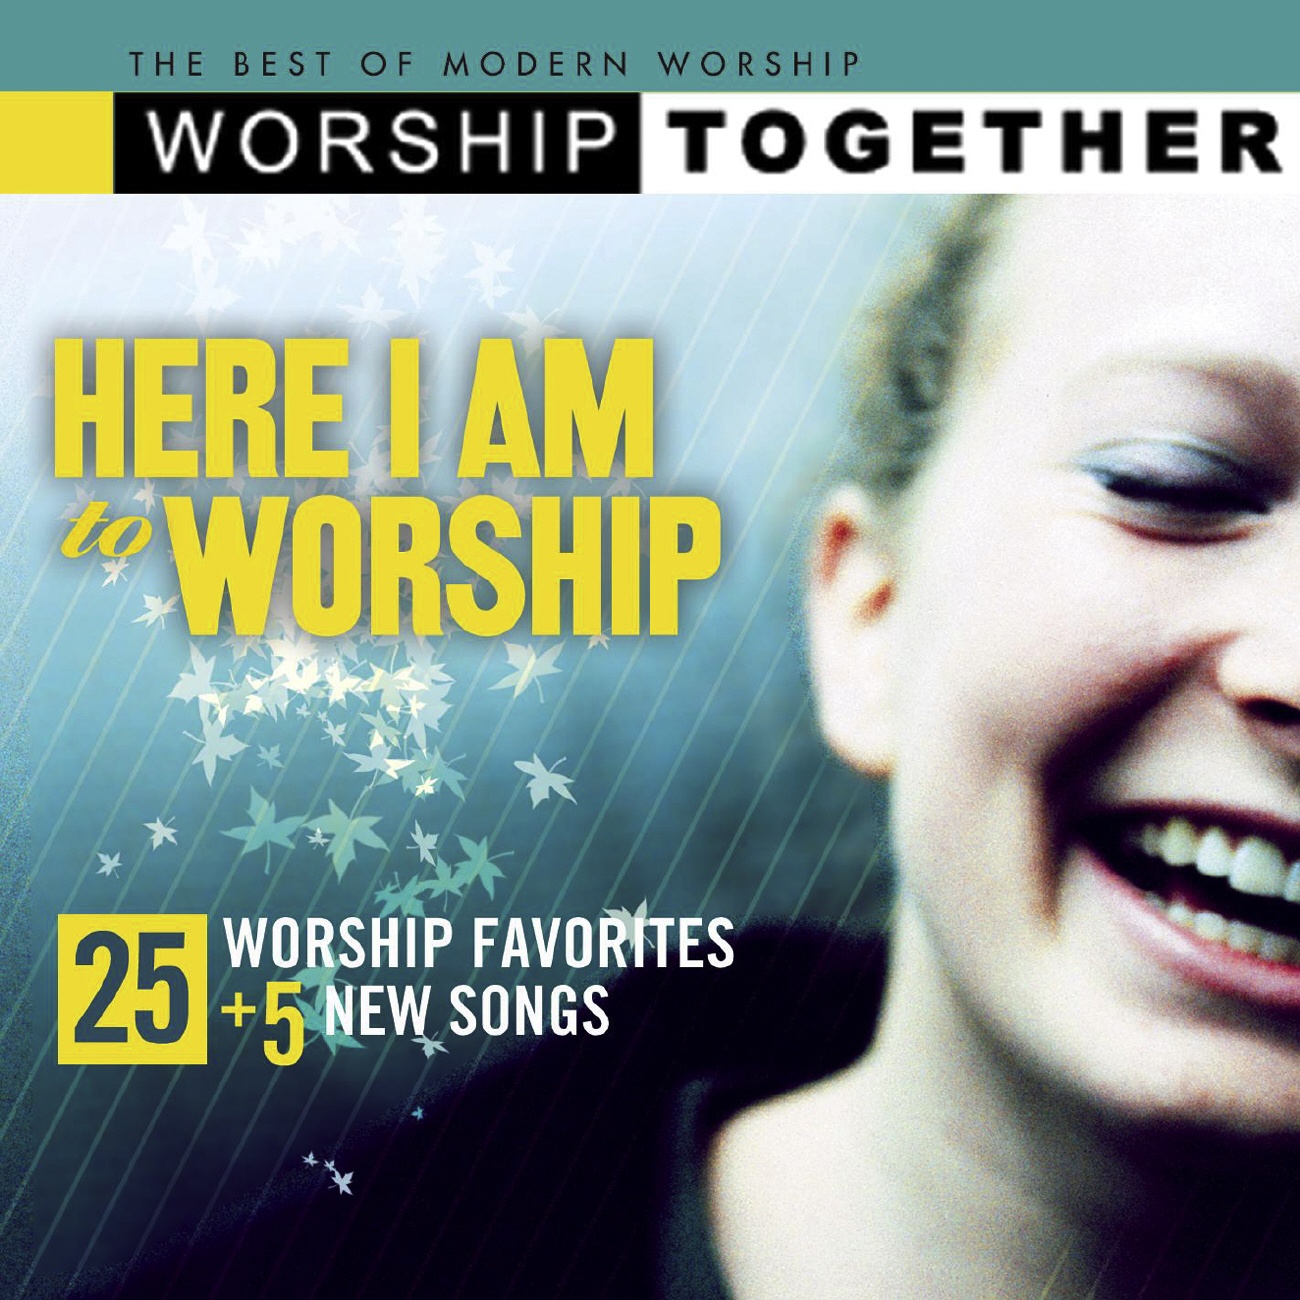 Here I Am To Worship - Vol. 1